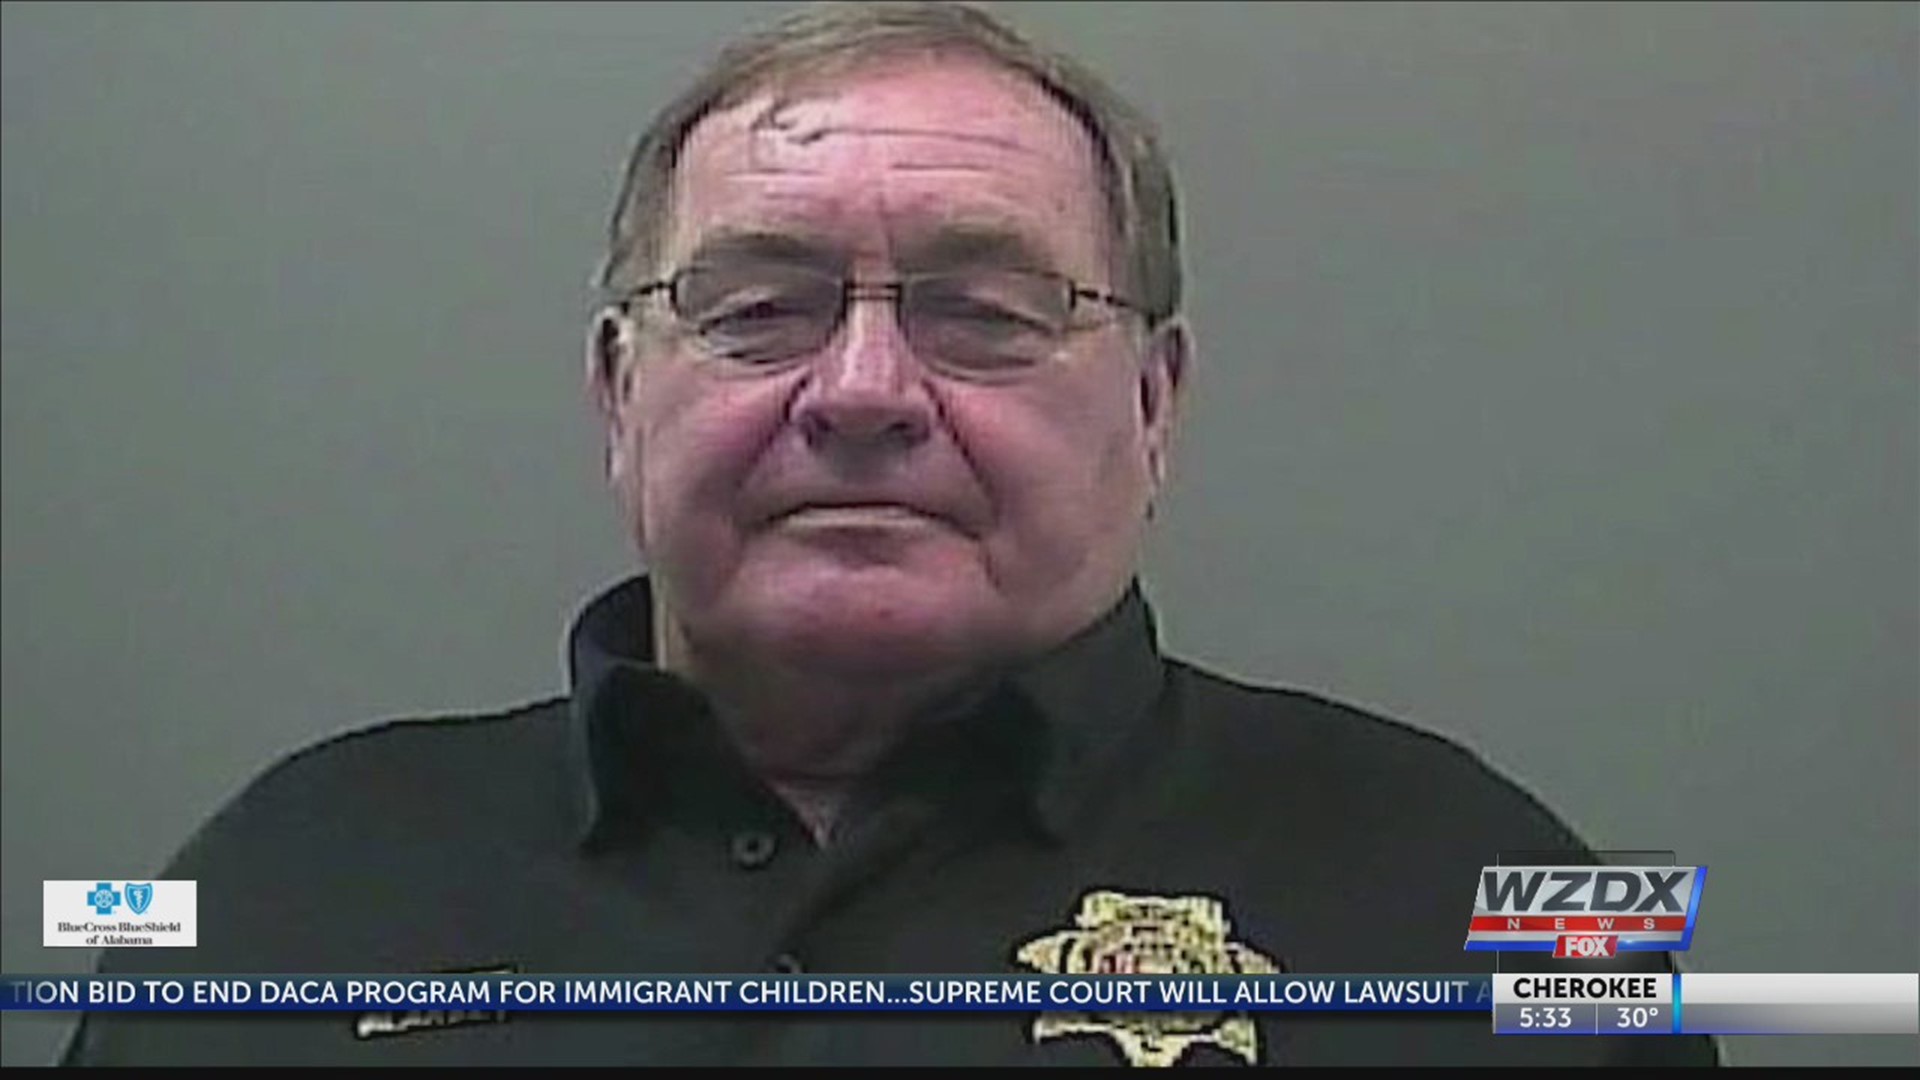 Sheriff Mike Blakely was in court on Tuesday in Limestone County, where he pleaded "not guilty" to charges including theft, using his official position or office to acquire interest-free loans, and ethics charges stemming from his illegal taking money from Limestone County funds, including from the Sheriff's Law Enforcement Fund.